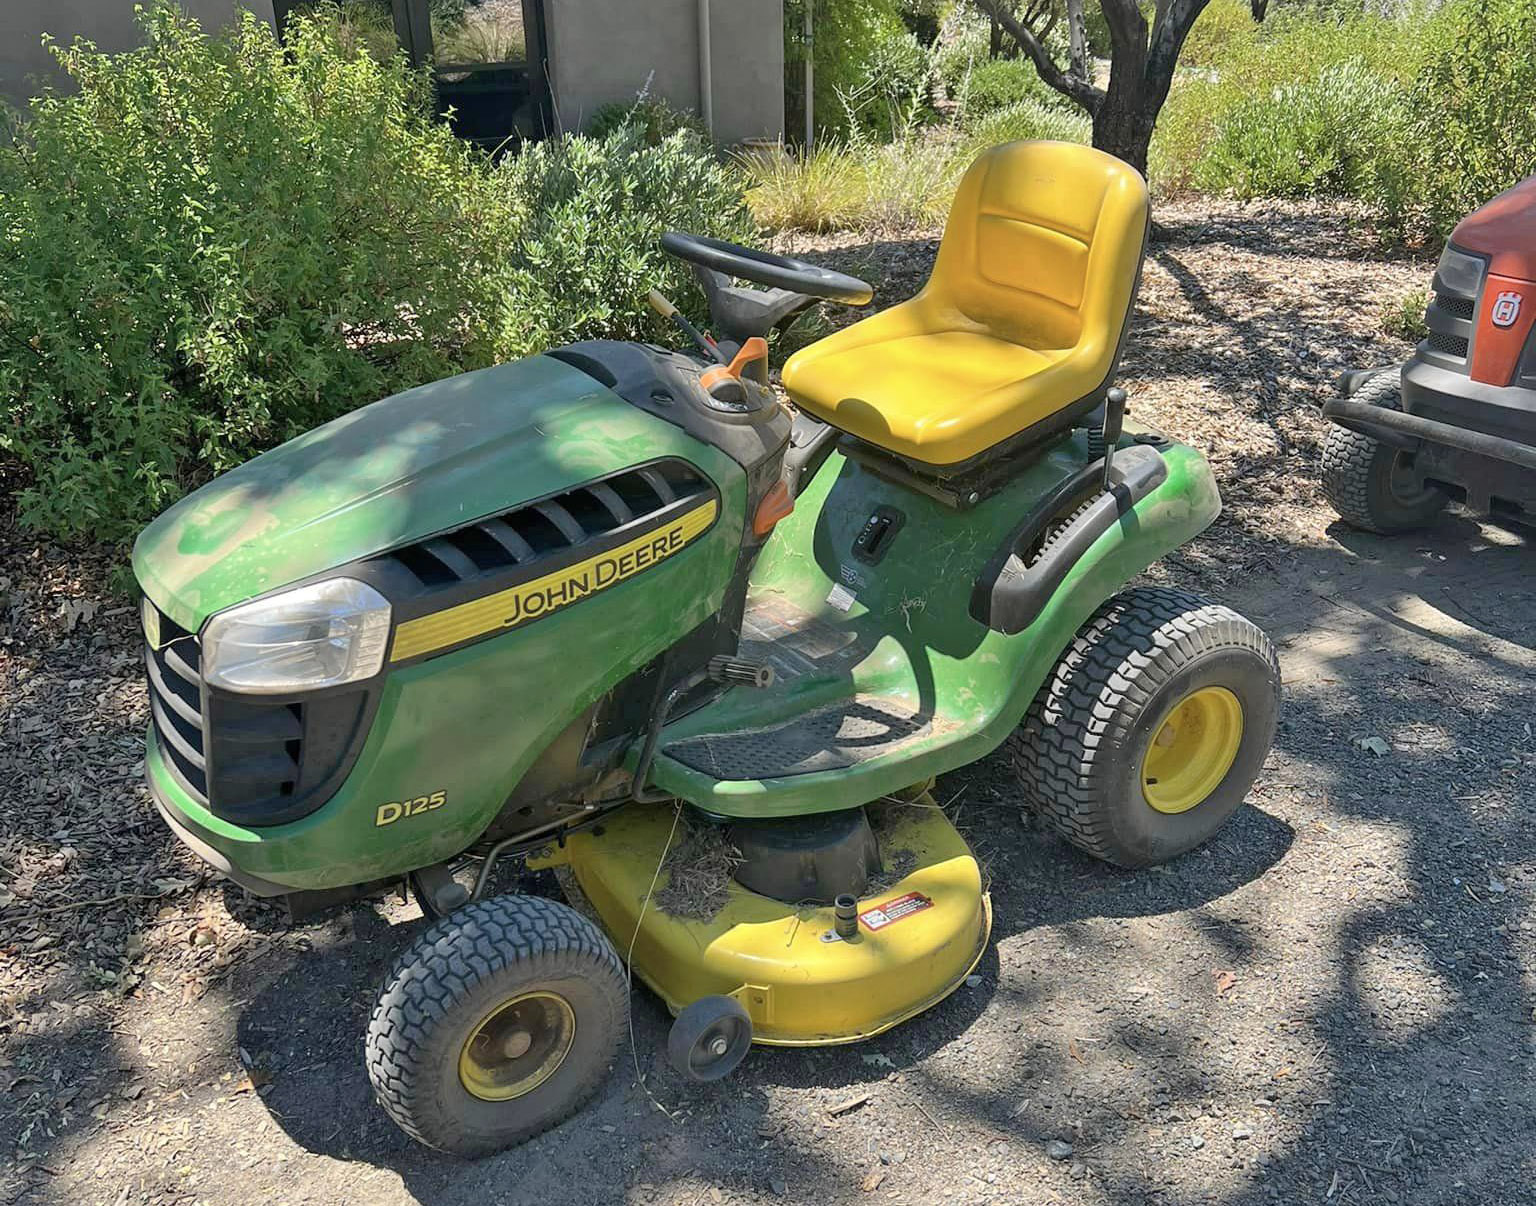 A man was arrested Saturday, July 6, in connection with the 11-acre Pocket Fire north of Geyserville after using a riding lawn mower like this one in dry grass. (Cal Fire Sonoma-Lake-Napa Unit/Facebook)